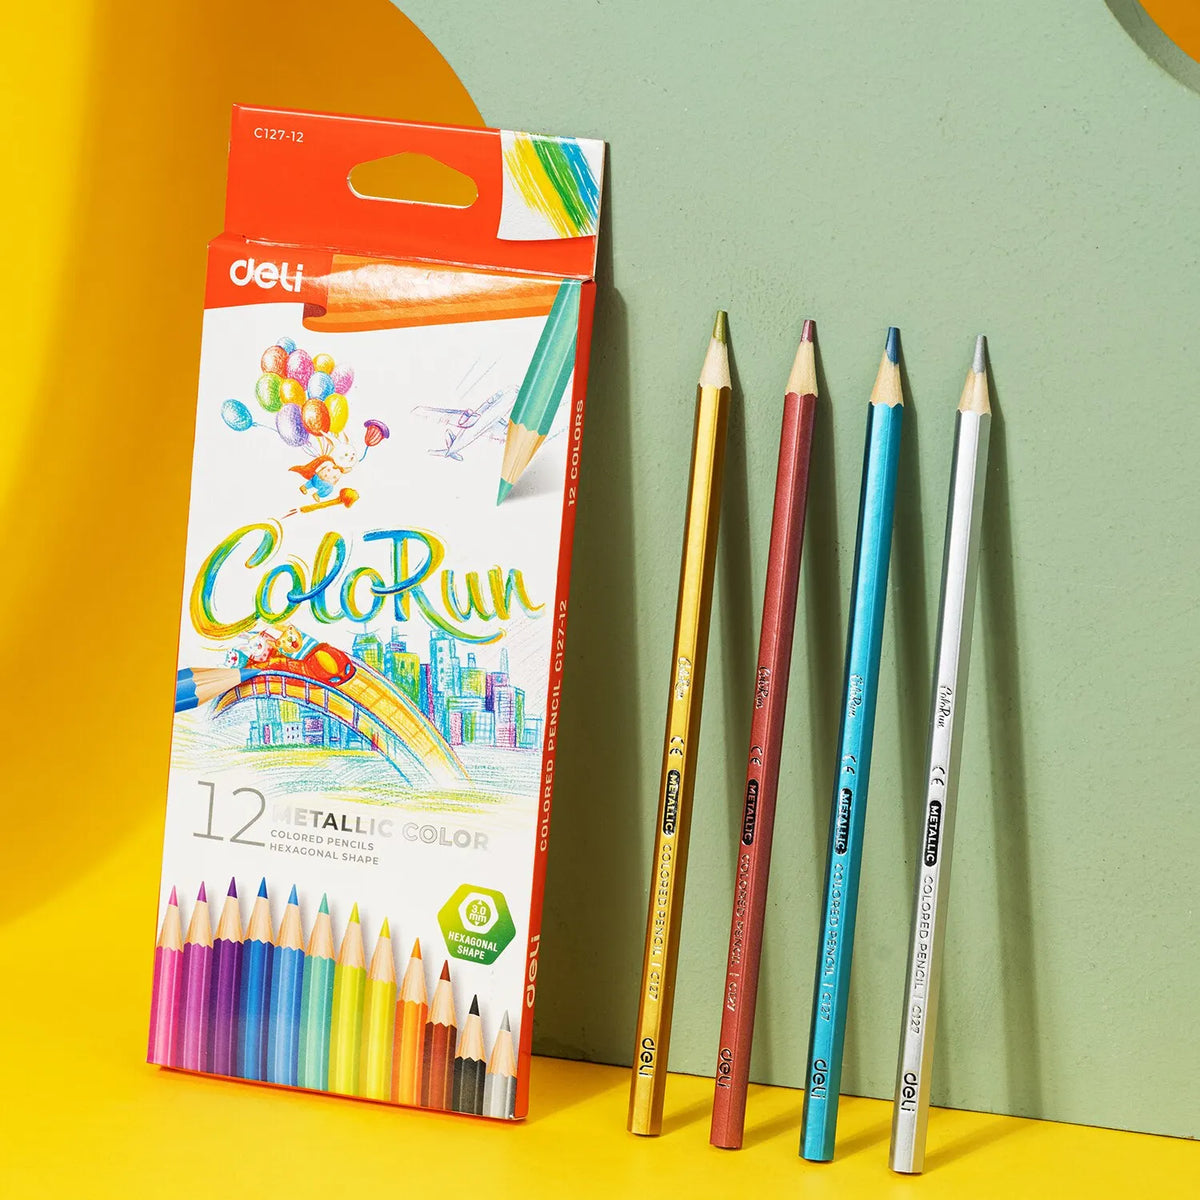 Deli Colored Pencil: Good Quality Colored Pencils, Painting Drawing Pencil